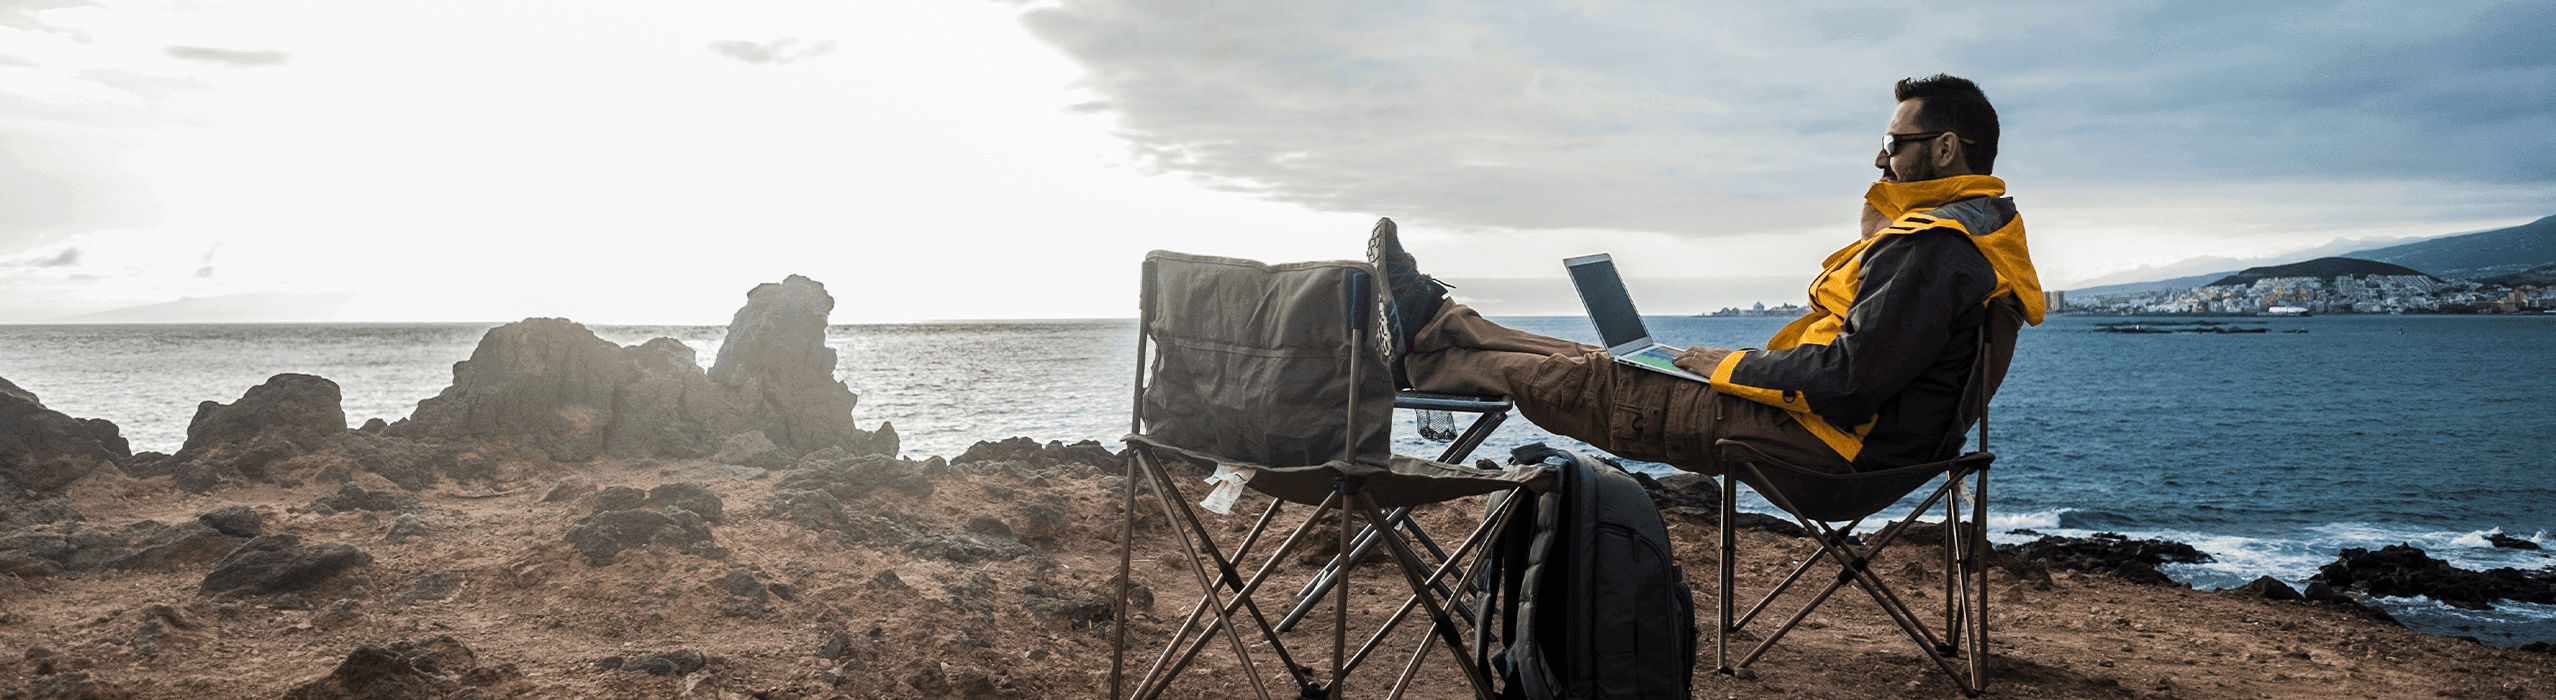 The How to become a digital nomad (and work remotely from anywhere!)'s article card